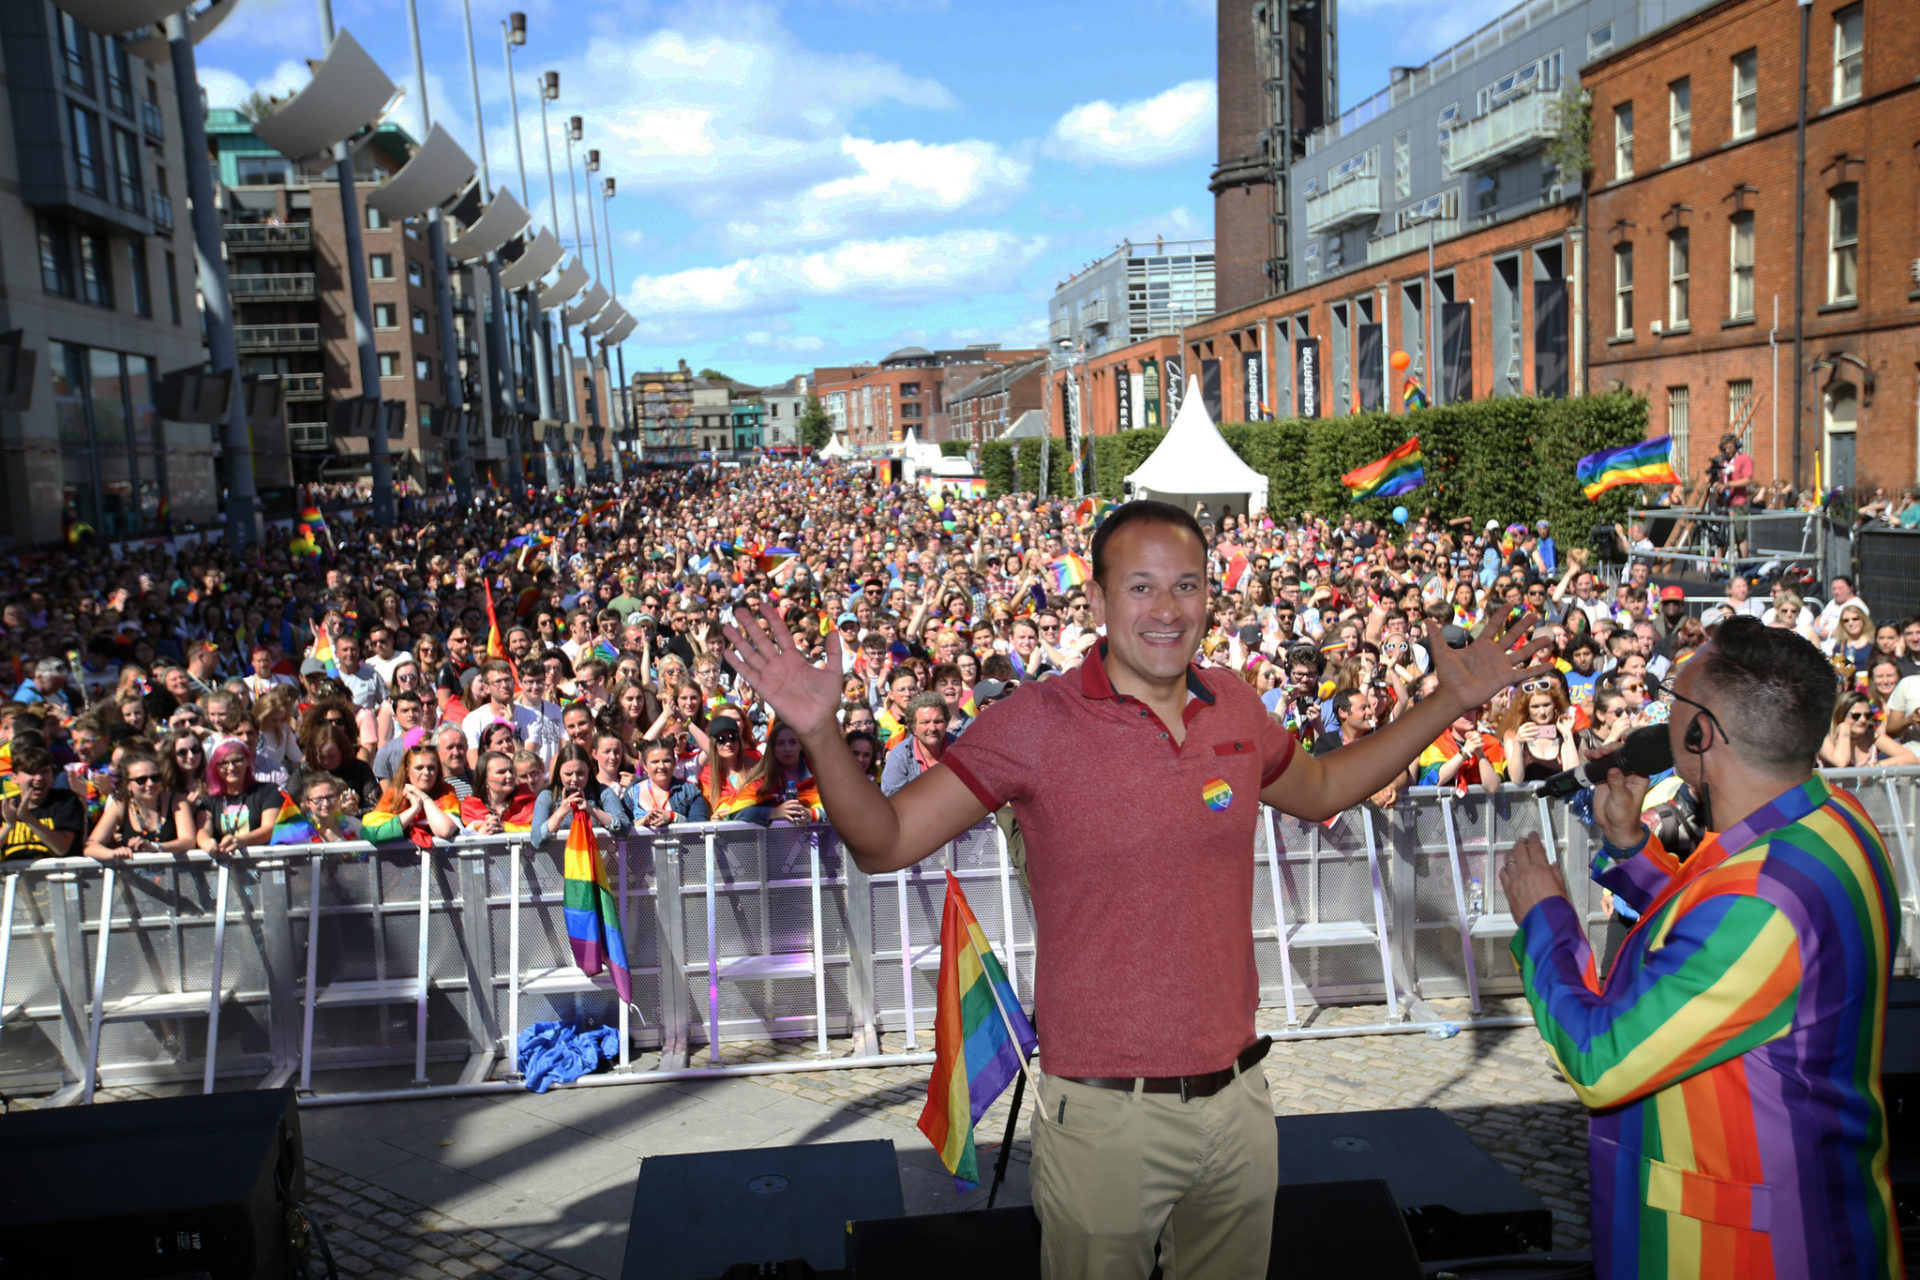 Leo Varadkar holds his hands up before a huge crowd during Pride in Dublin, 24-6-17.